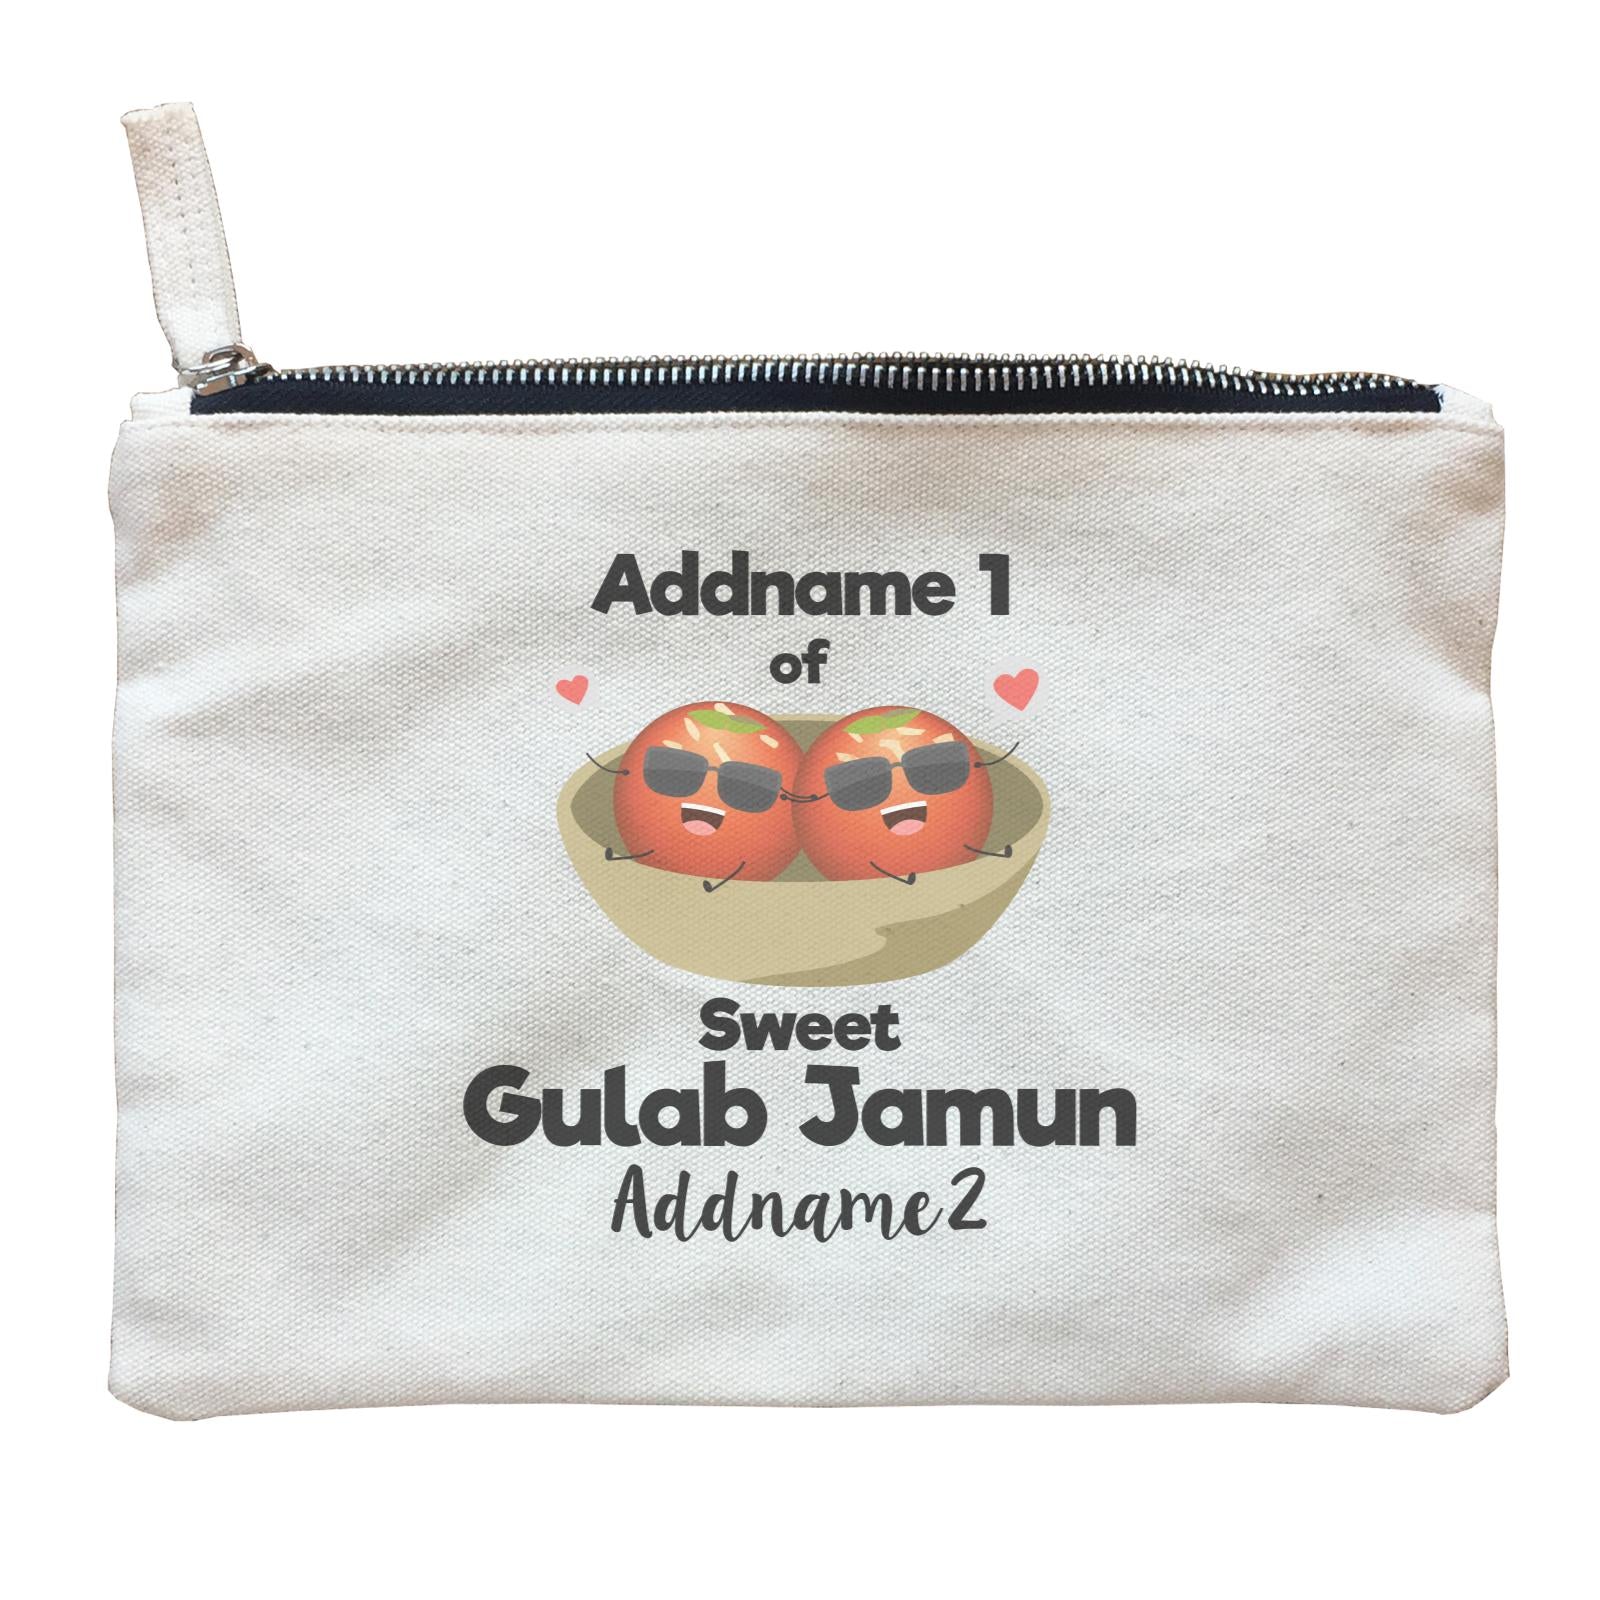 Addname 1 of Sweet Gulab Jamun Addname 2 Zipper Pouch